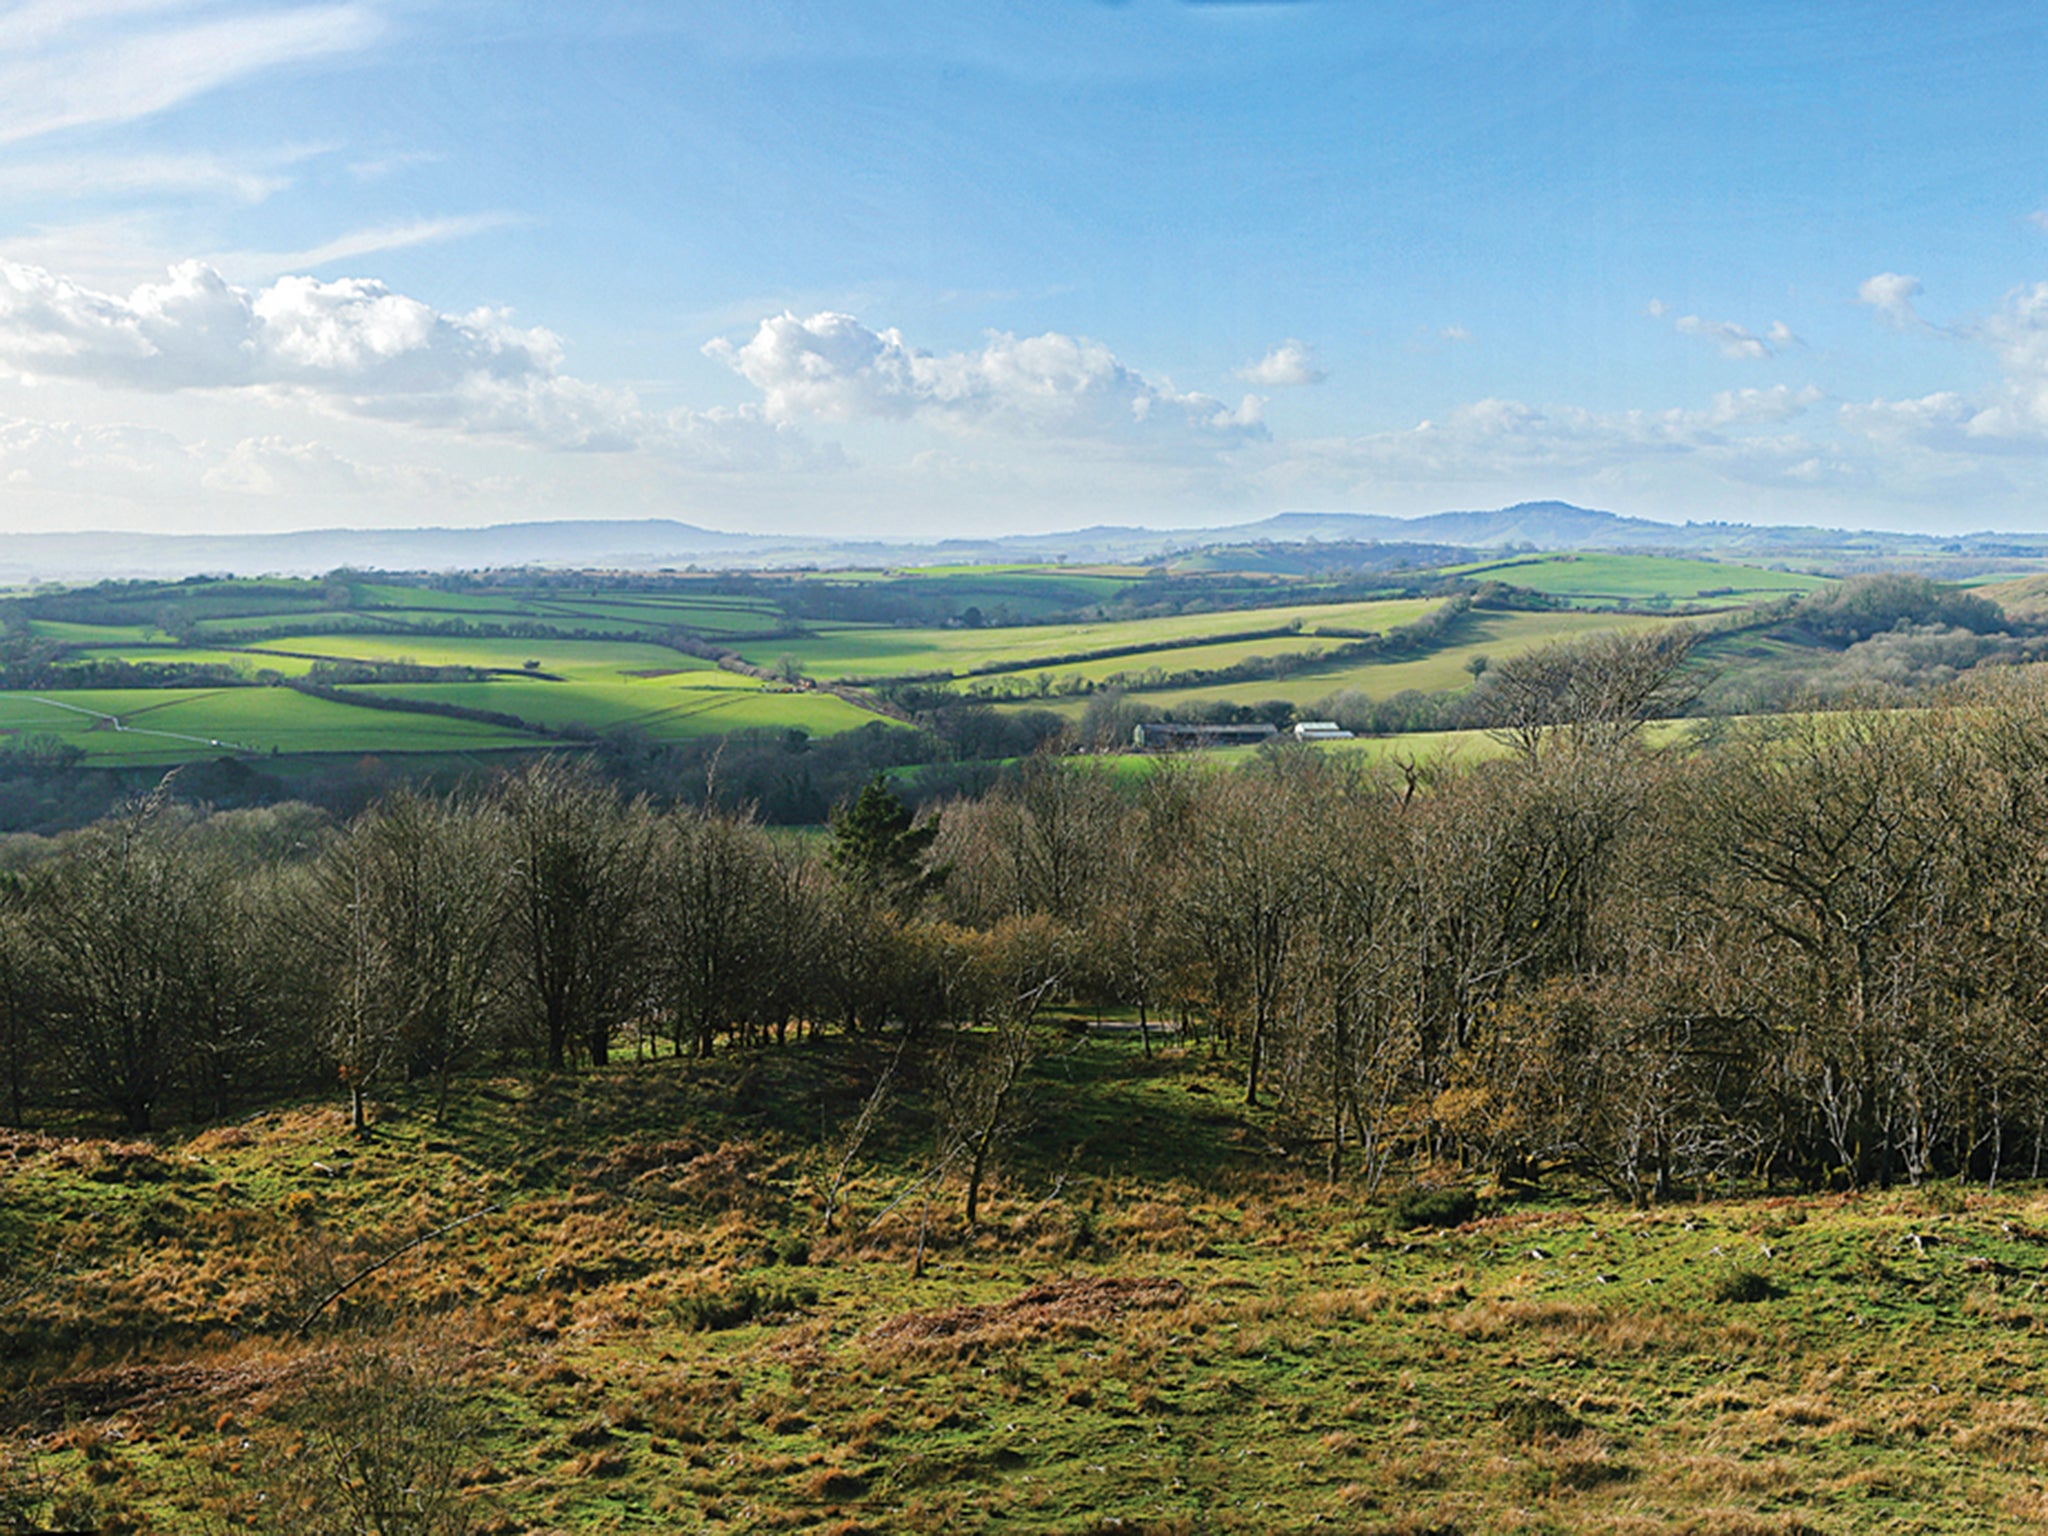 View From Powerstock Nature Reserve, Dorset. (© Tony Bates/Press image from Jessica Thornton)